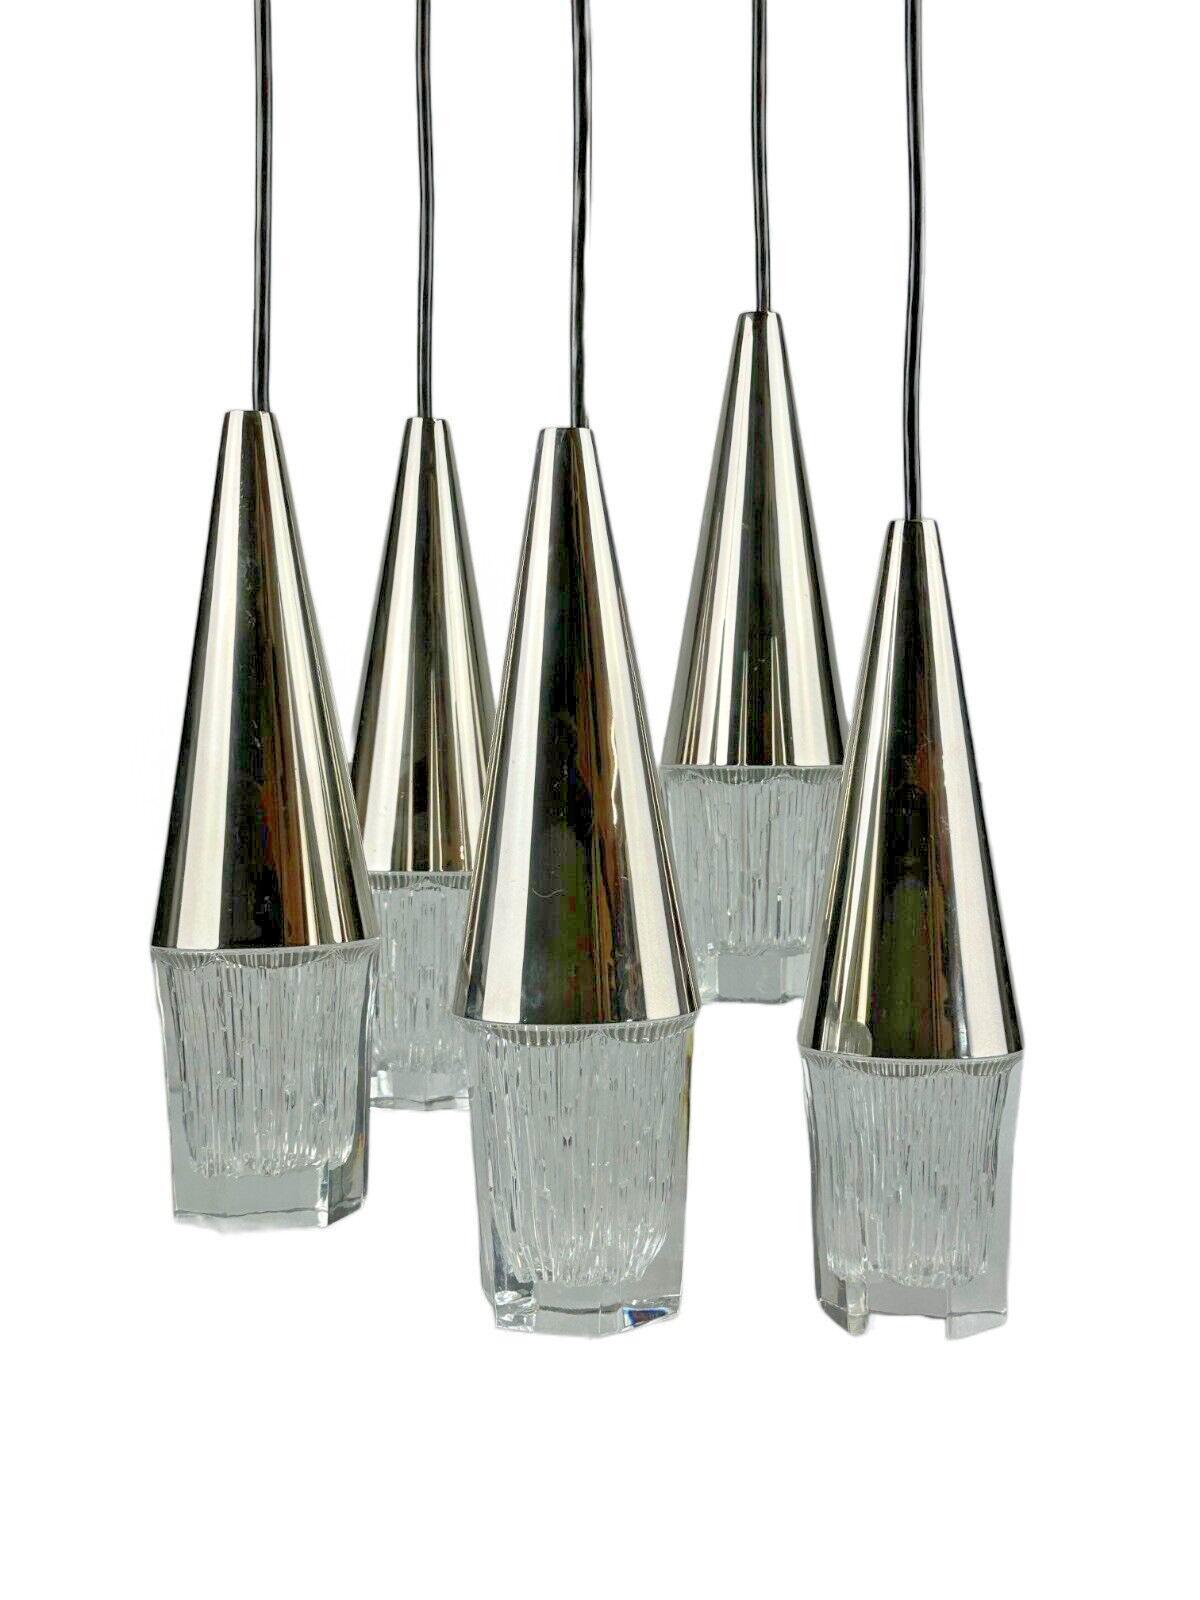 60s 70s hanging lamp cascade lamp 5 lights glass & chrome space age design

Object: cascade lamp

Manufacturer:

Condition: good

Age: around 1960-1970

Dimensions:

Diameter = 35cm
Height = 110cm

Other notes:

5x E14 socket

The pictures serve as